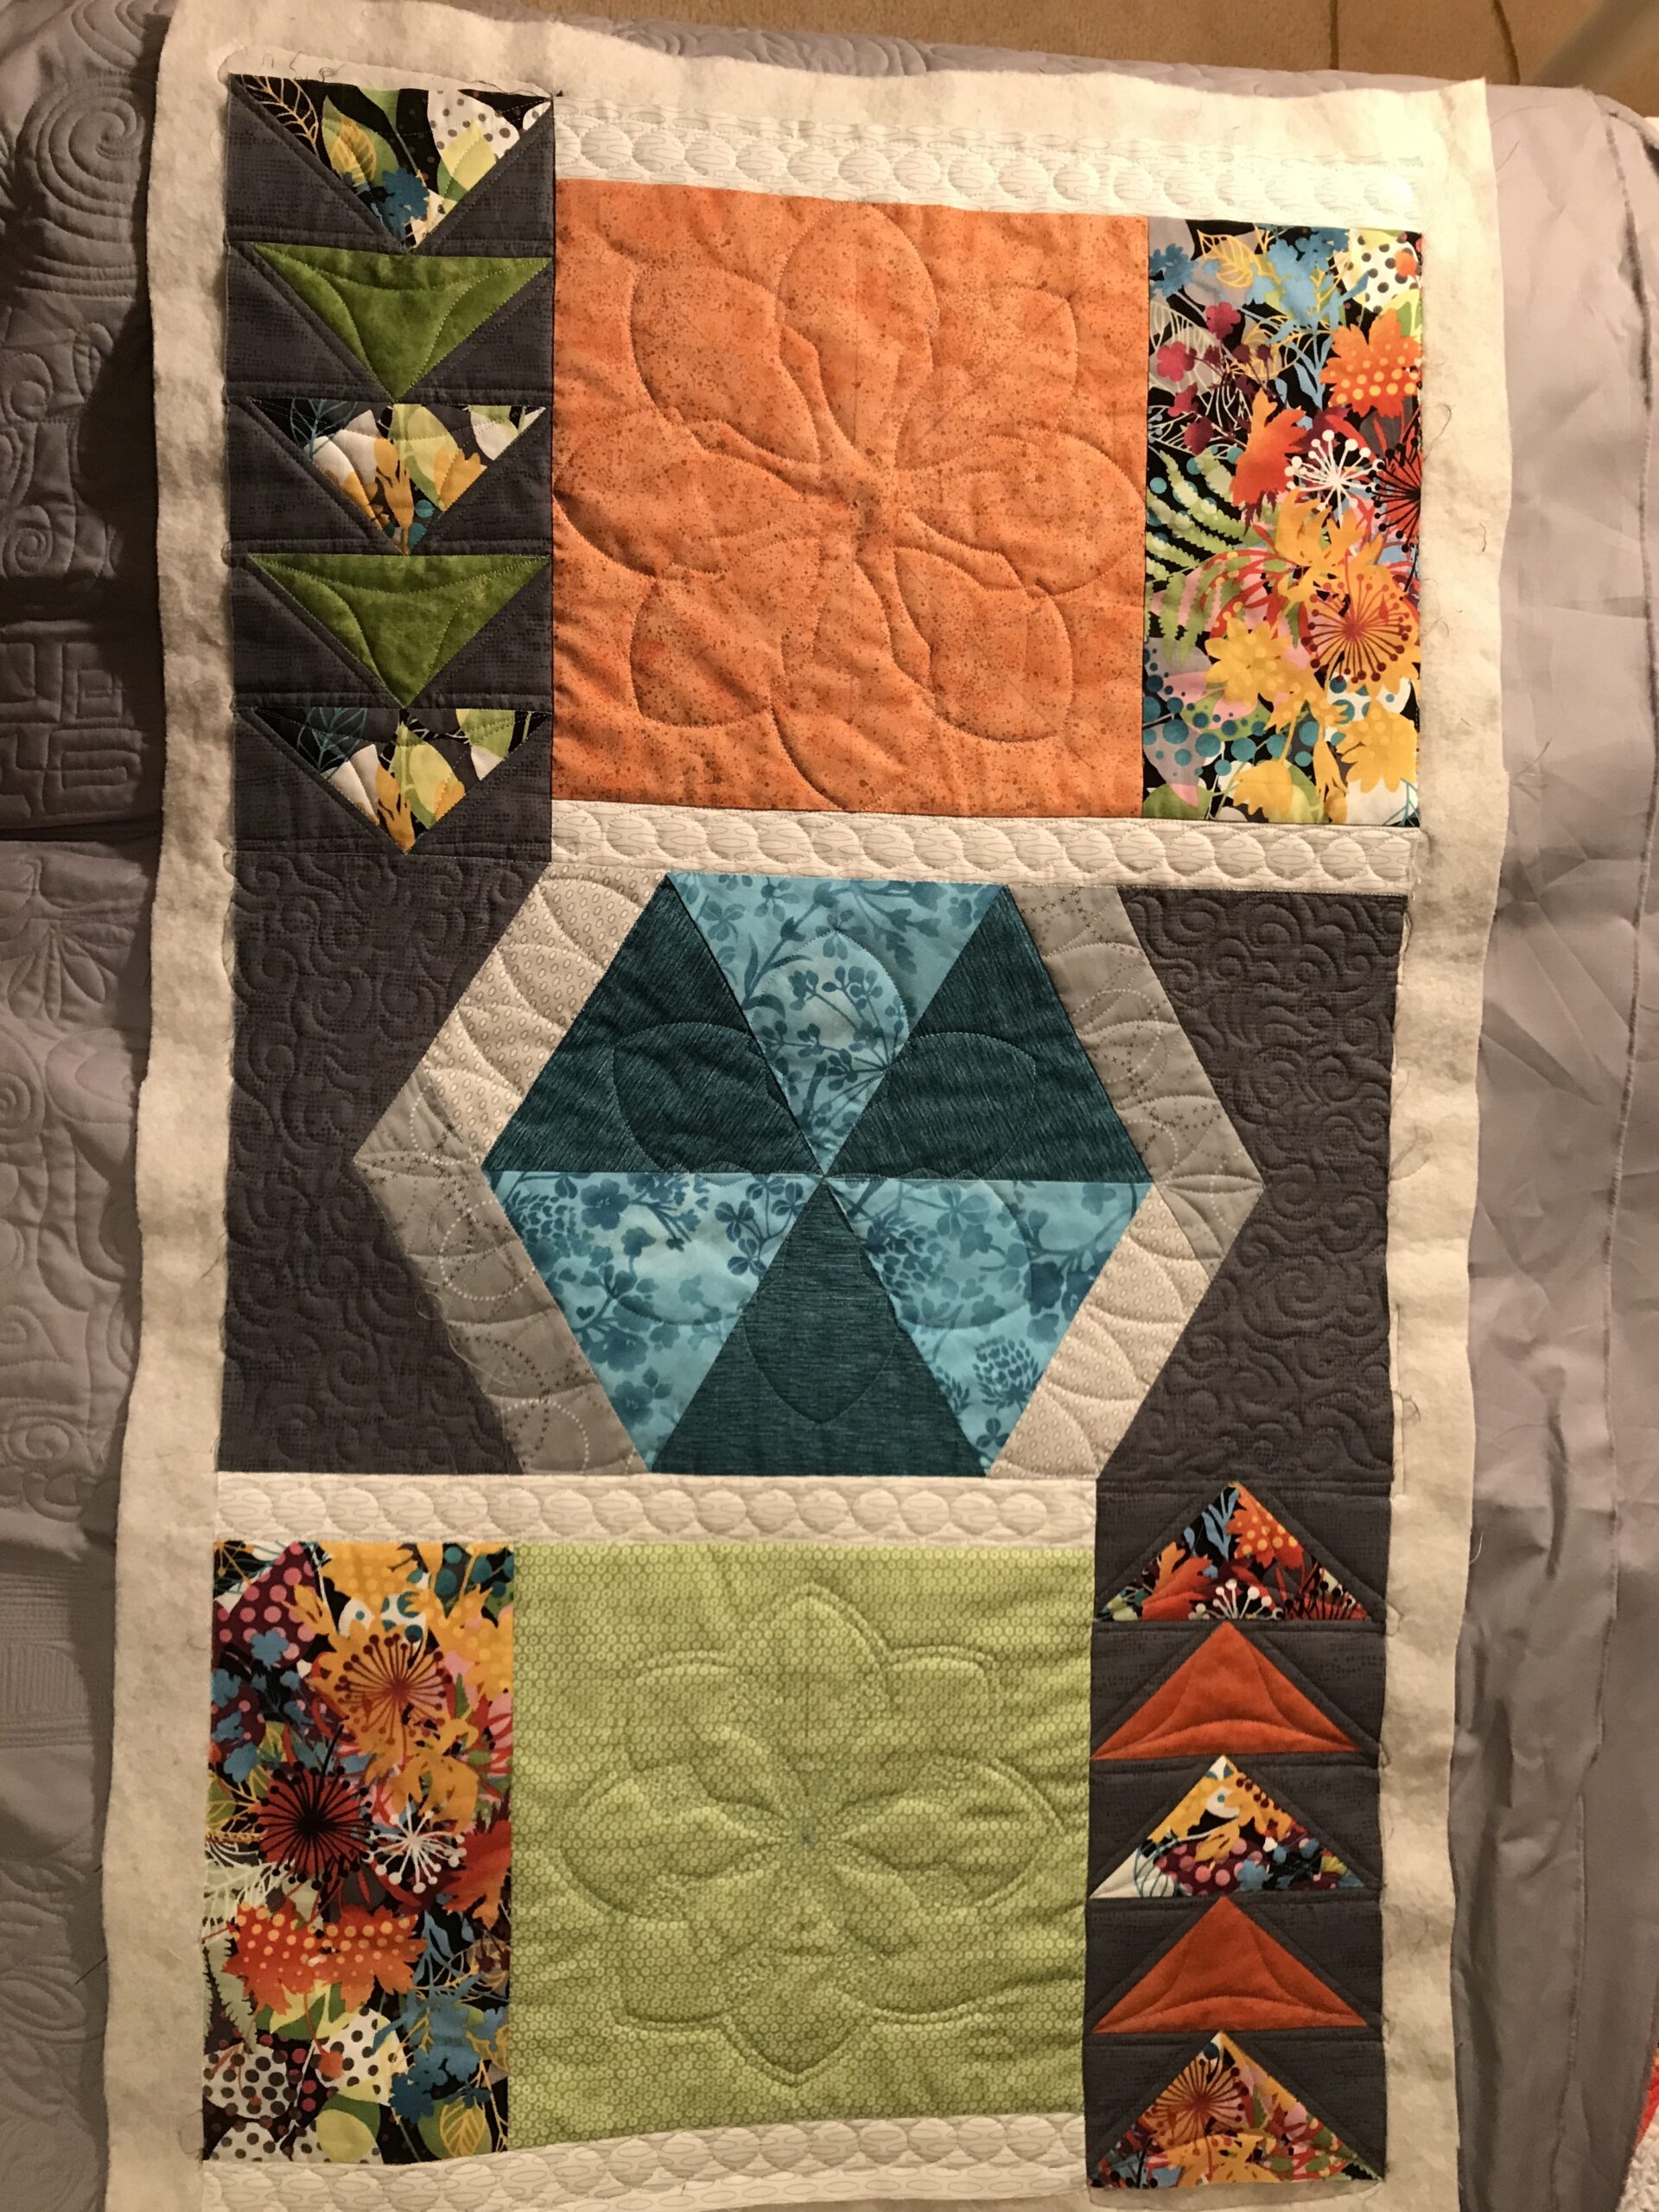 Beginner Essential Quilting Kit by Westalee - Stitch in the Ditch